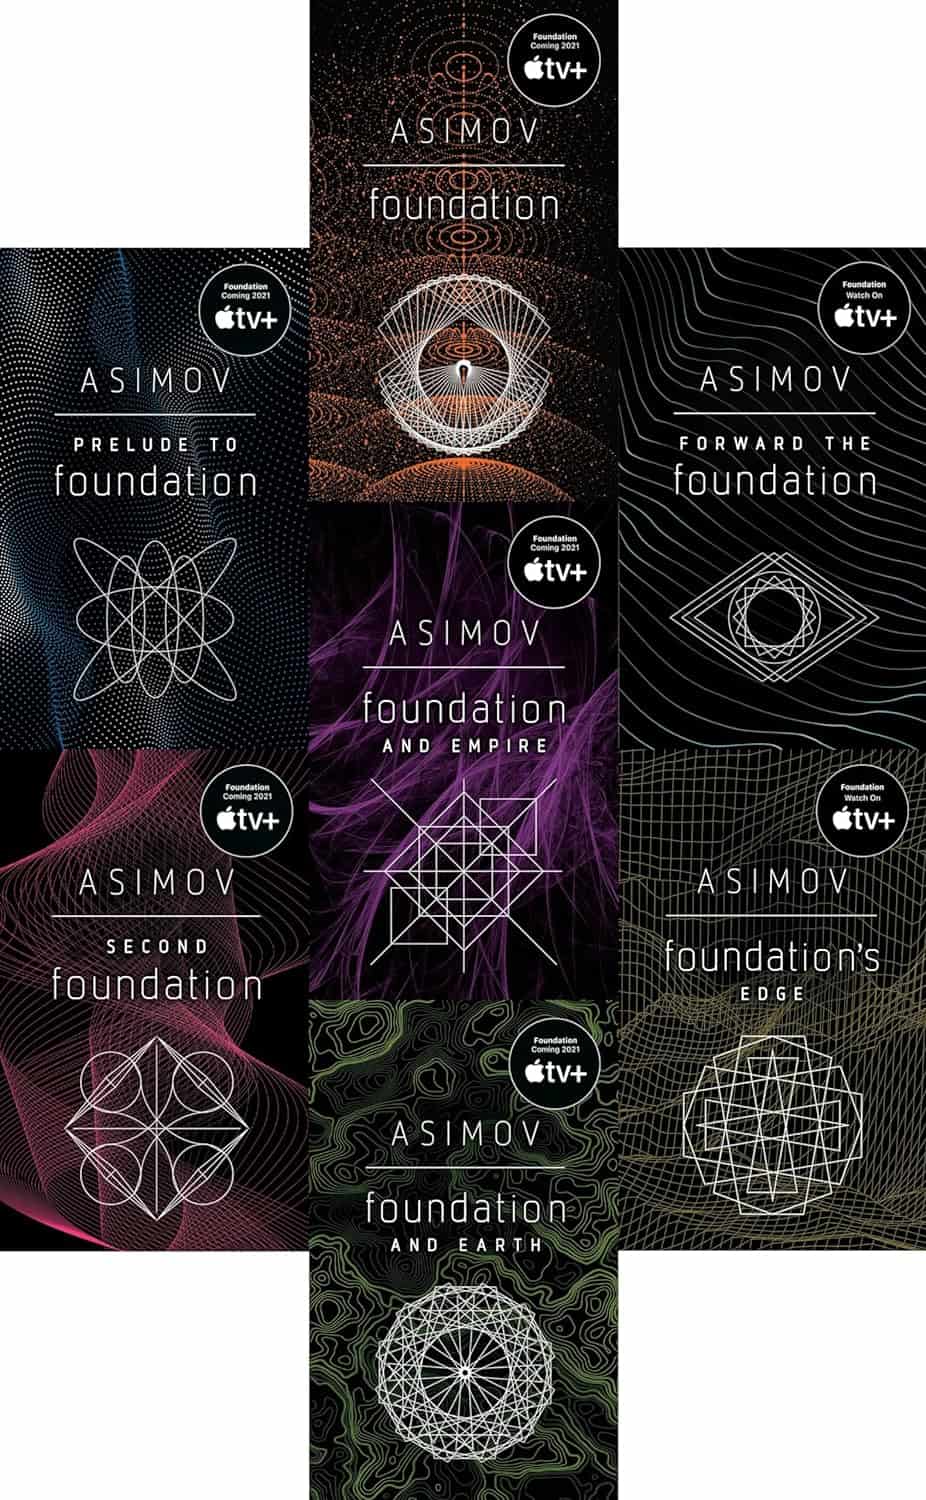 The Foundation Series by Isaac Asimov